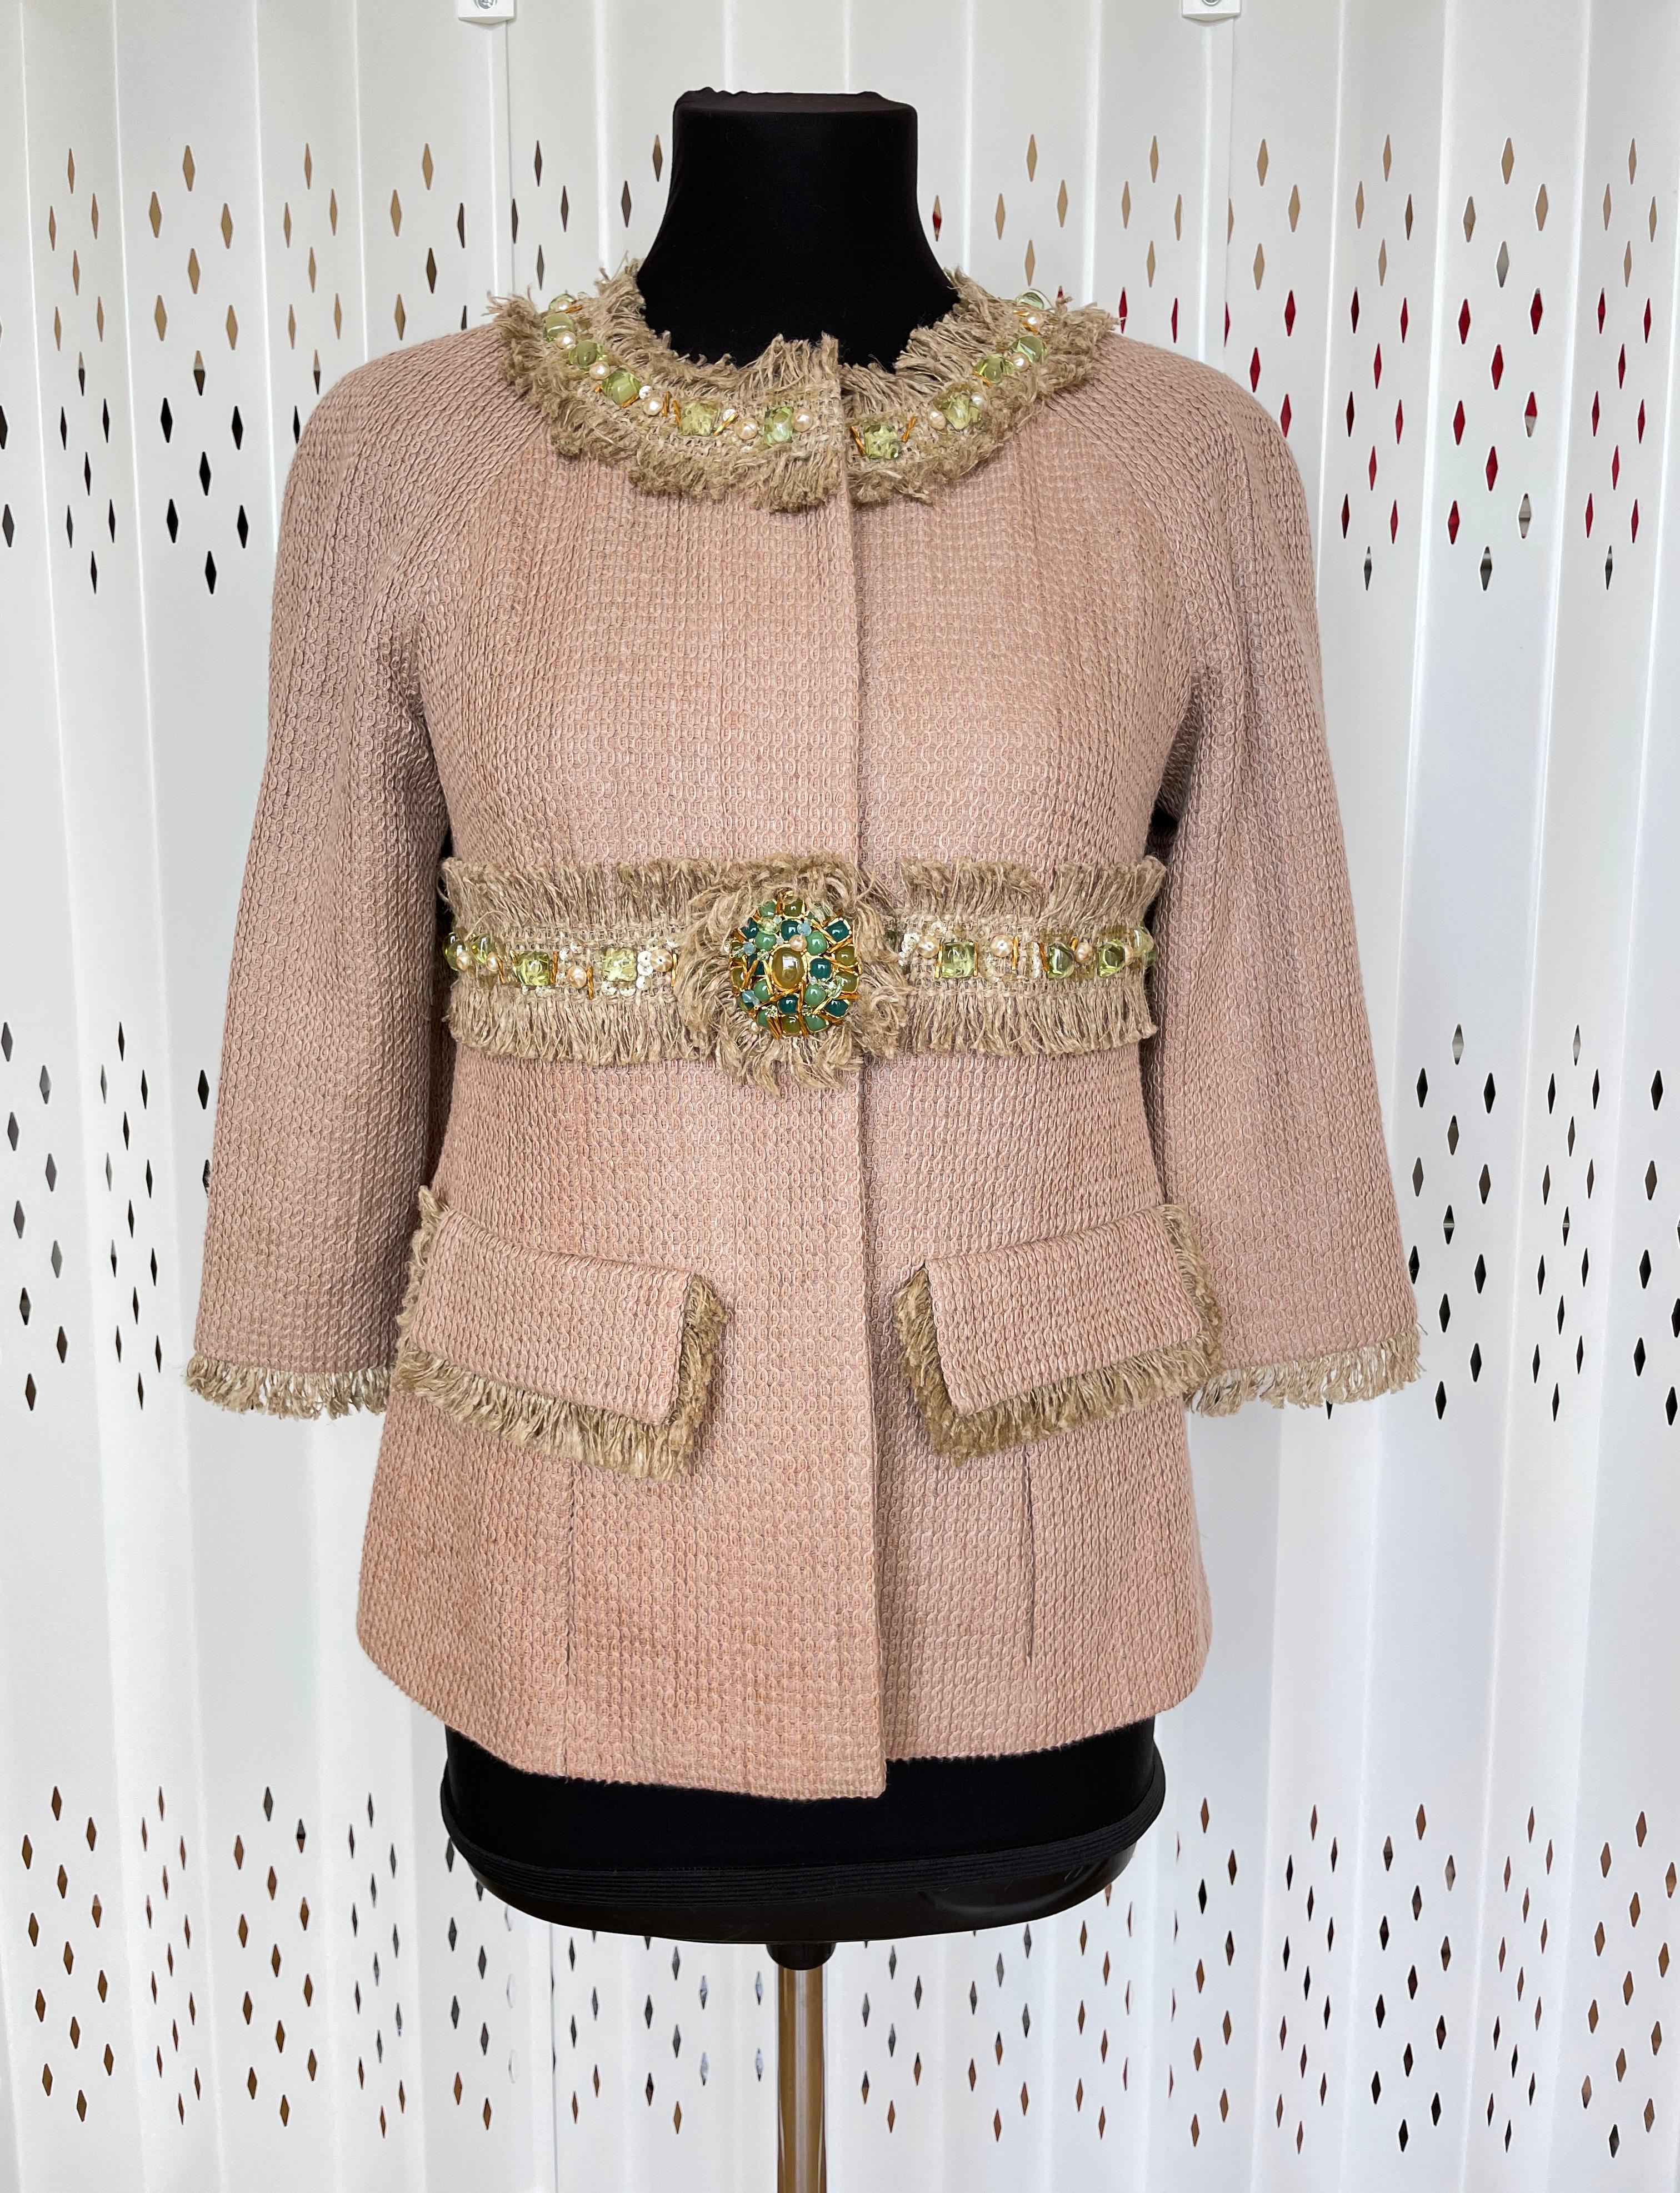 Chanel 10K$ Jewel Embellished Beige Tweed Jacket In Excellent Condition For Sale In Dubai, AE